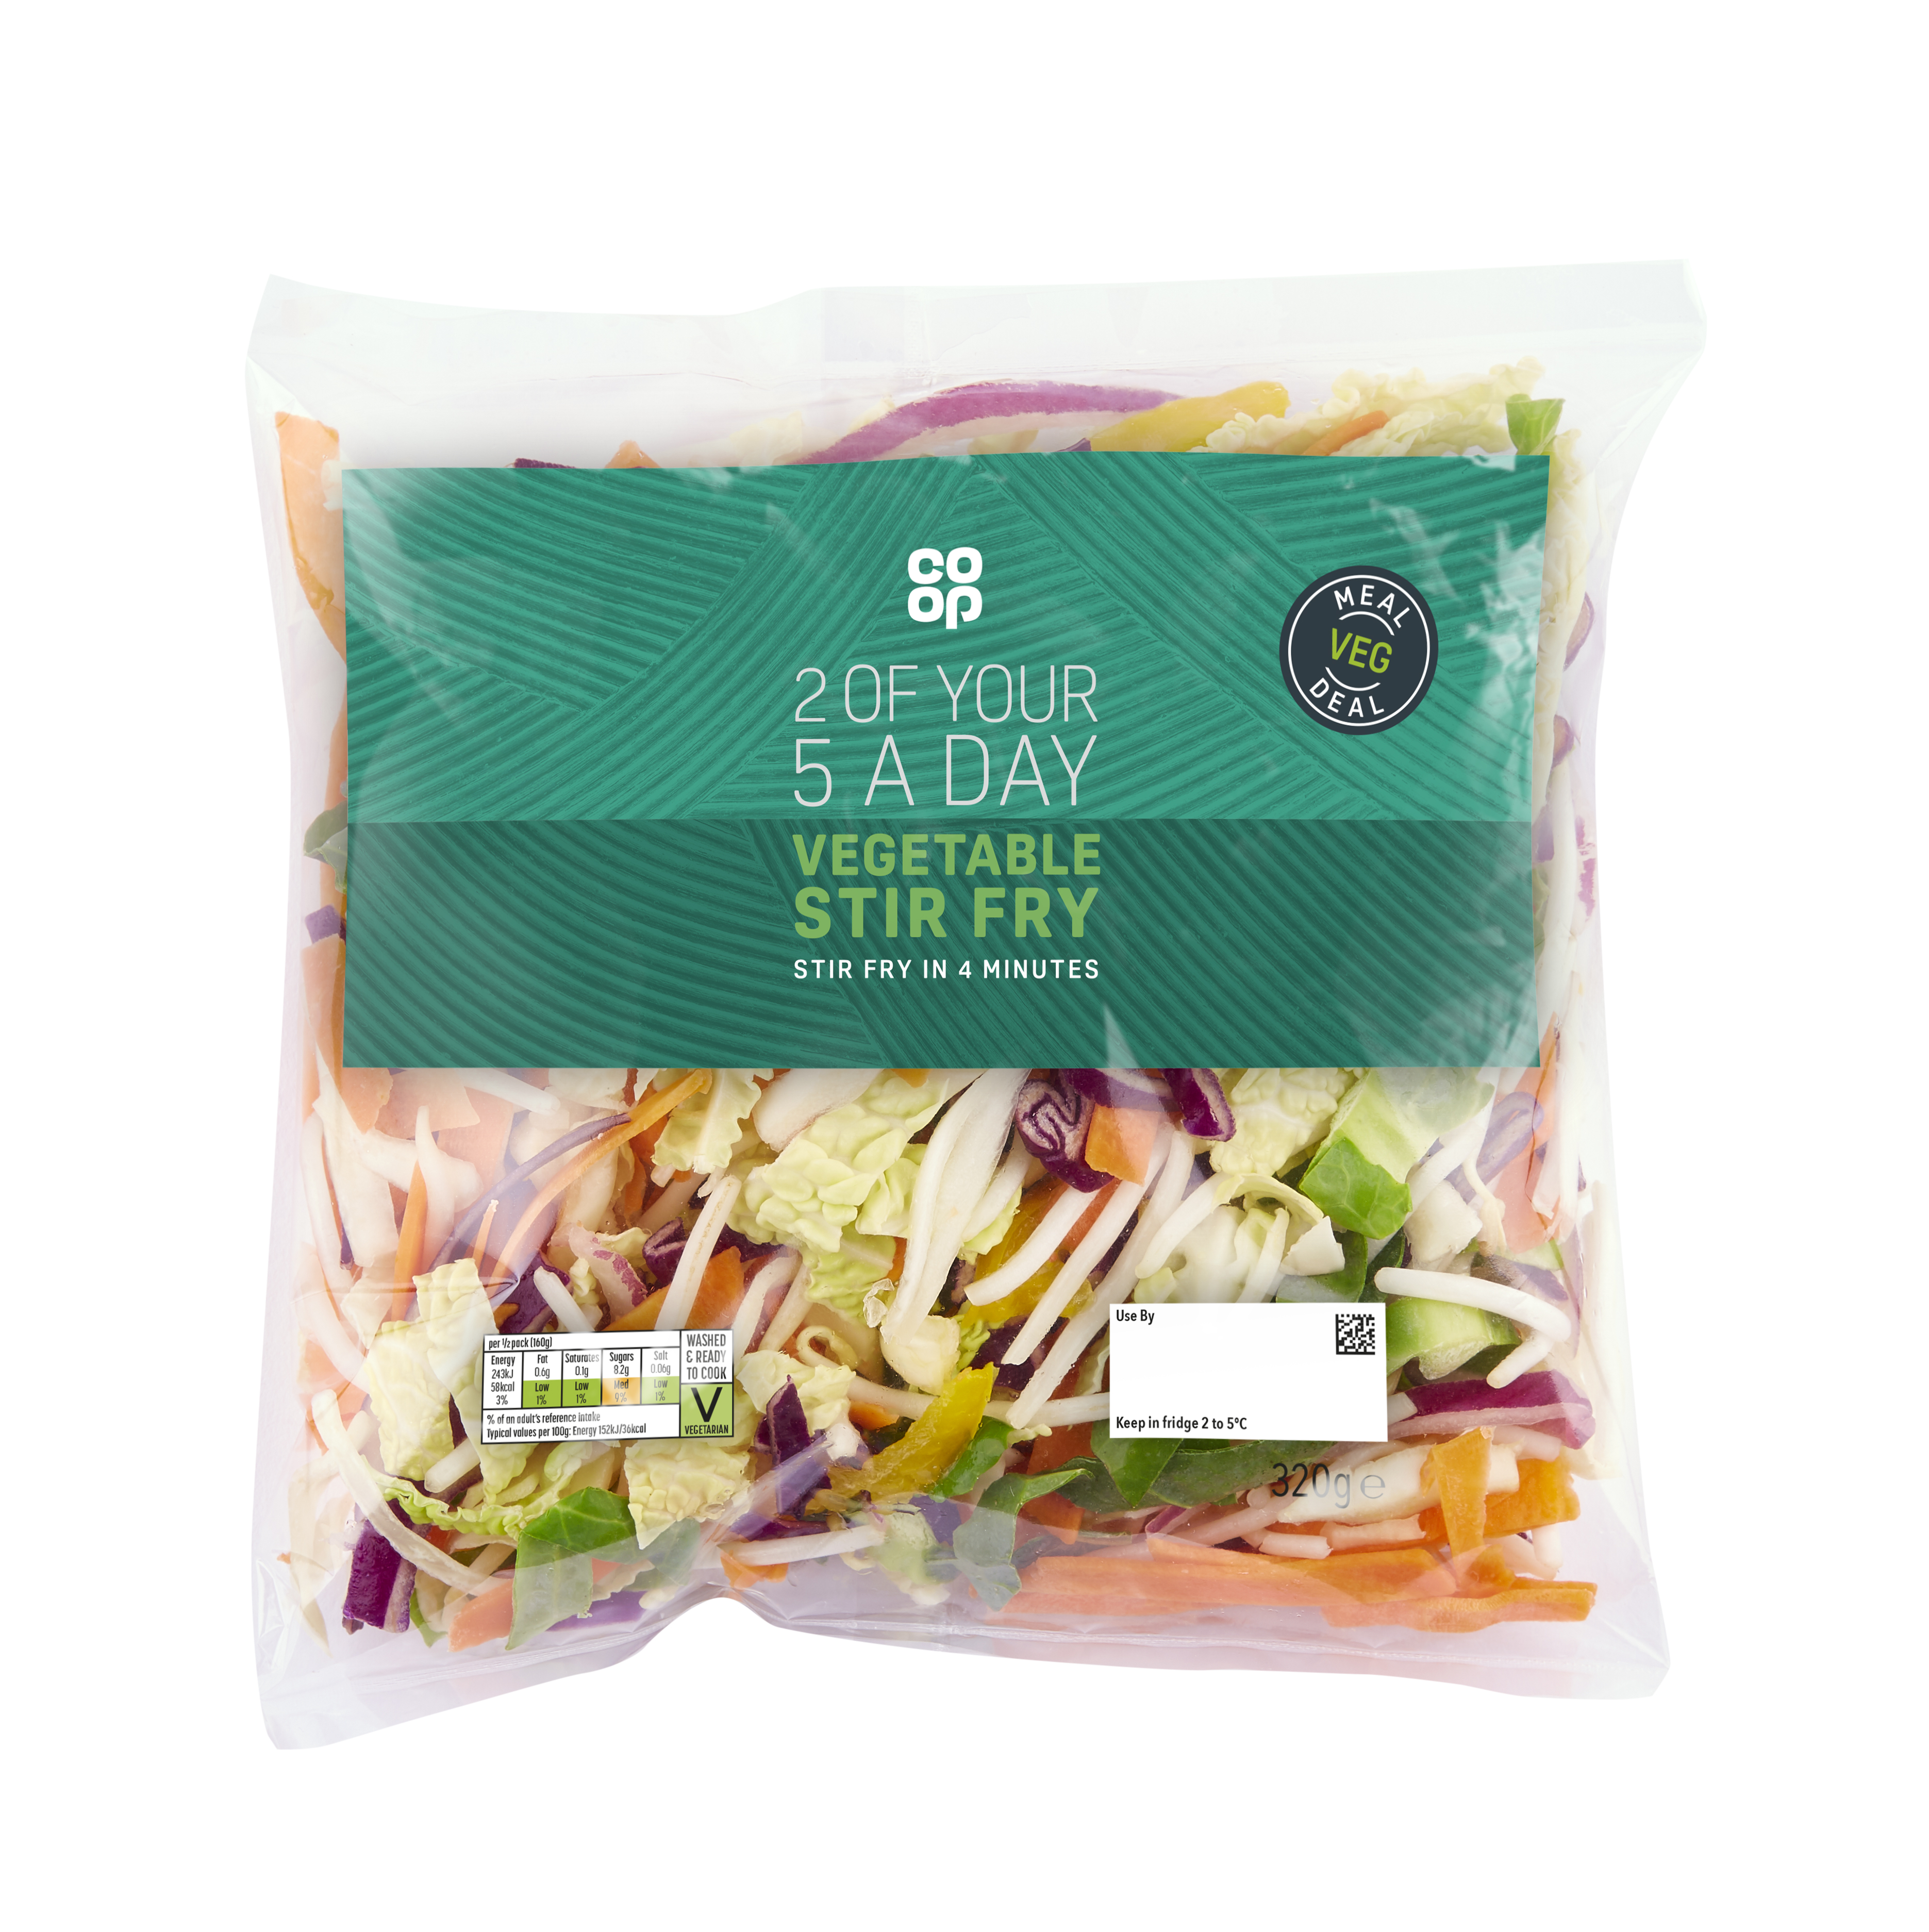 Grab a stir-fry meal for two for just £6 at Co-op